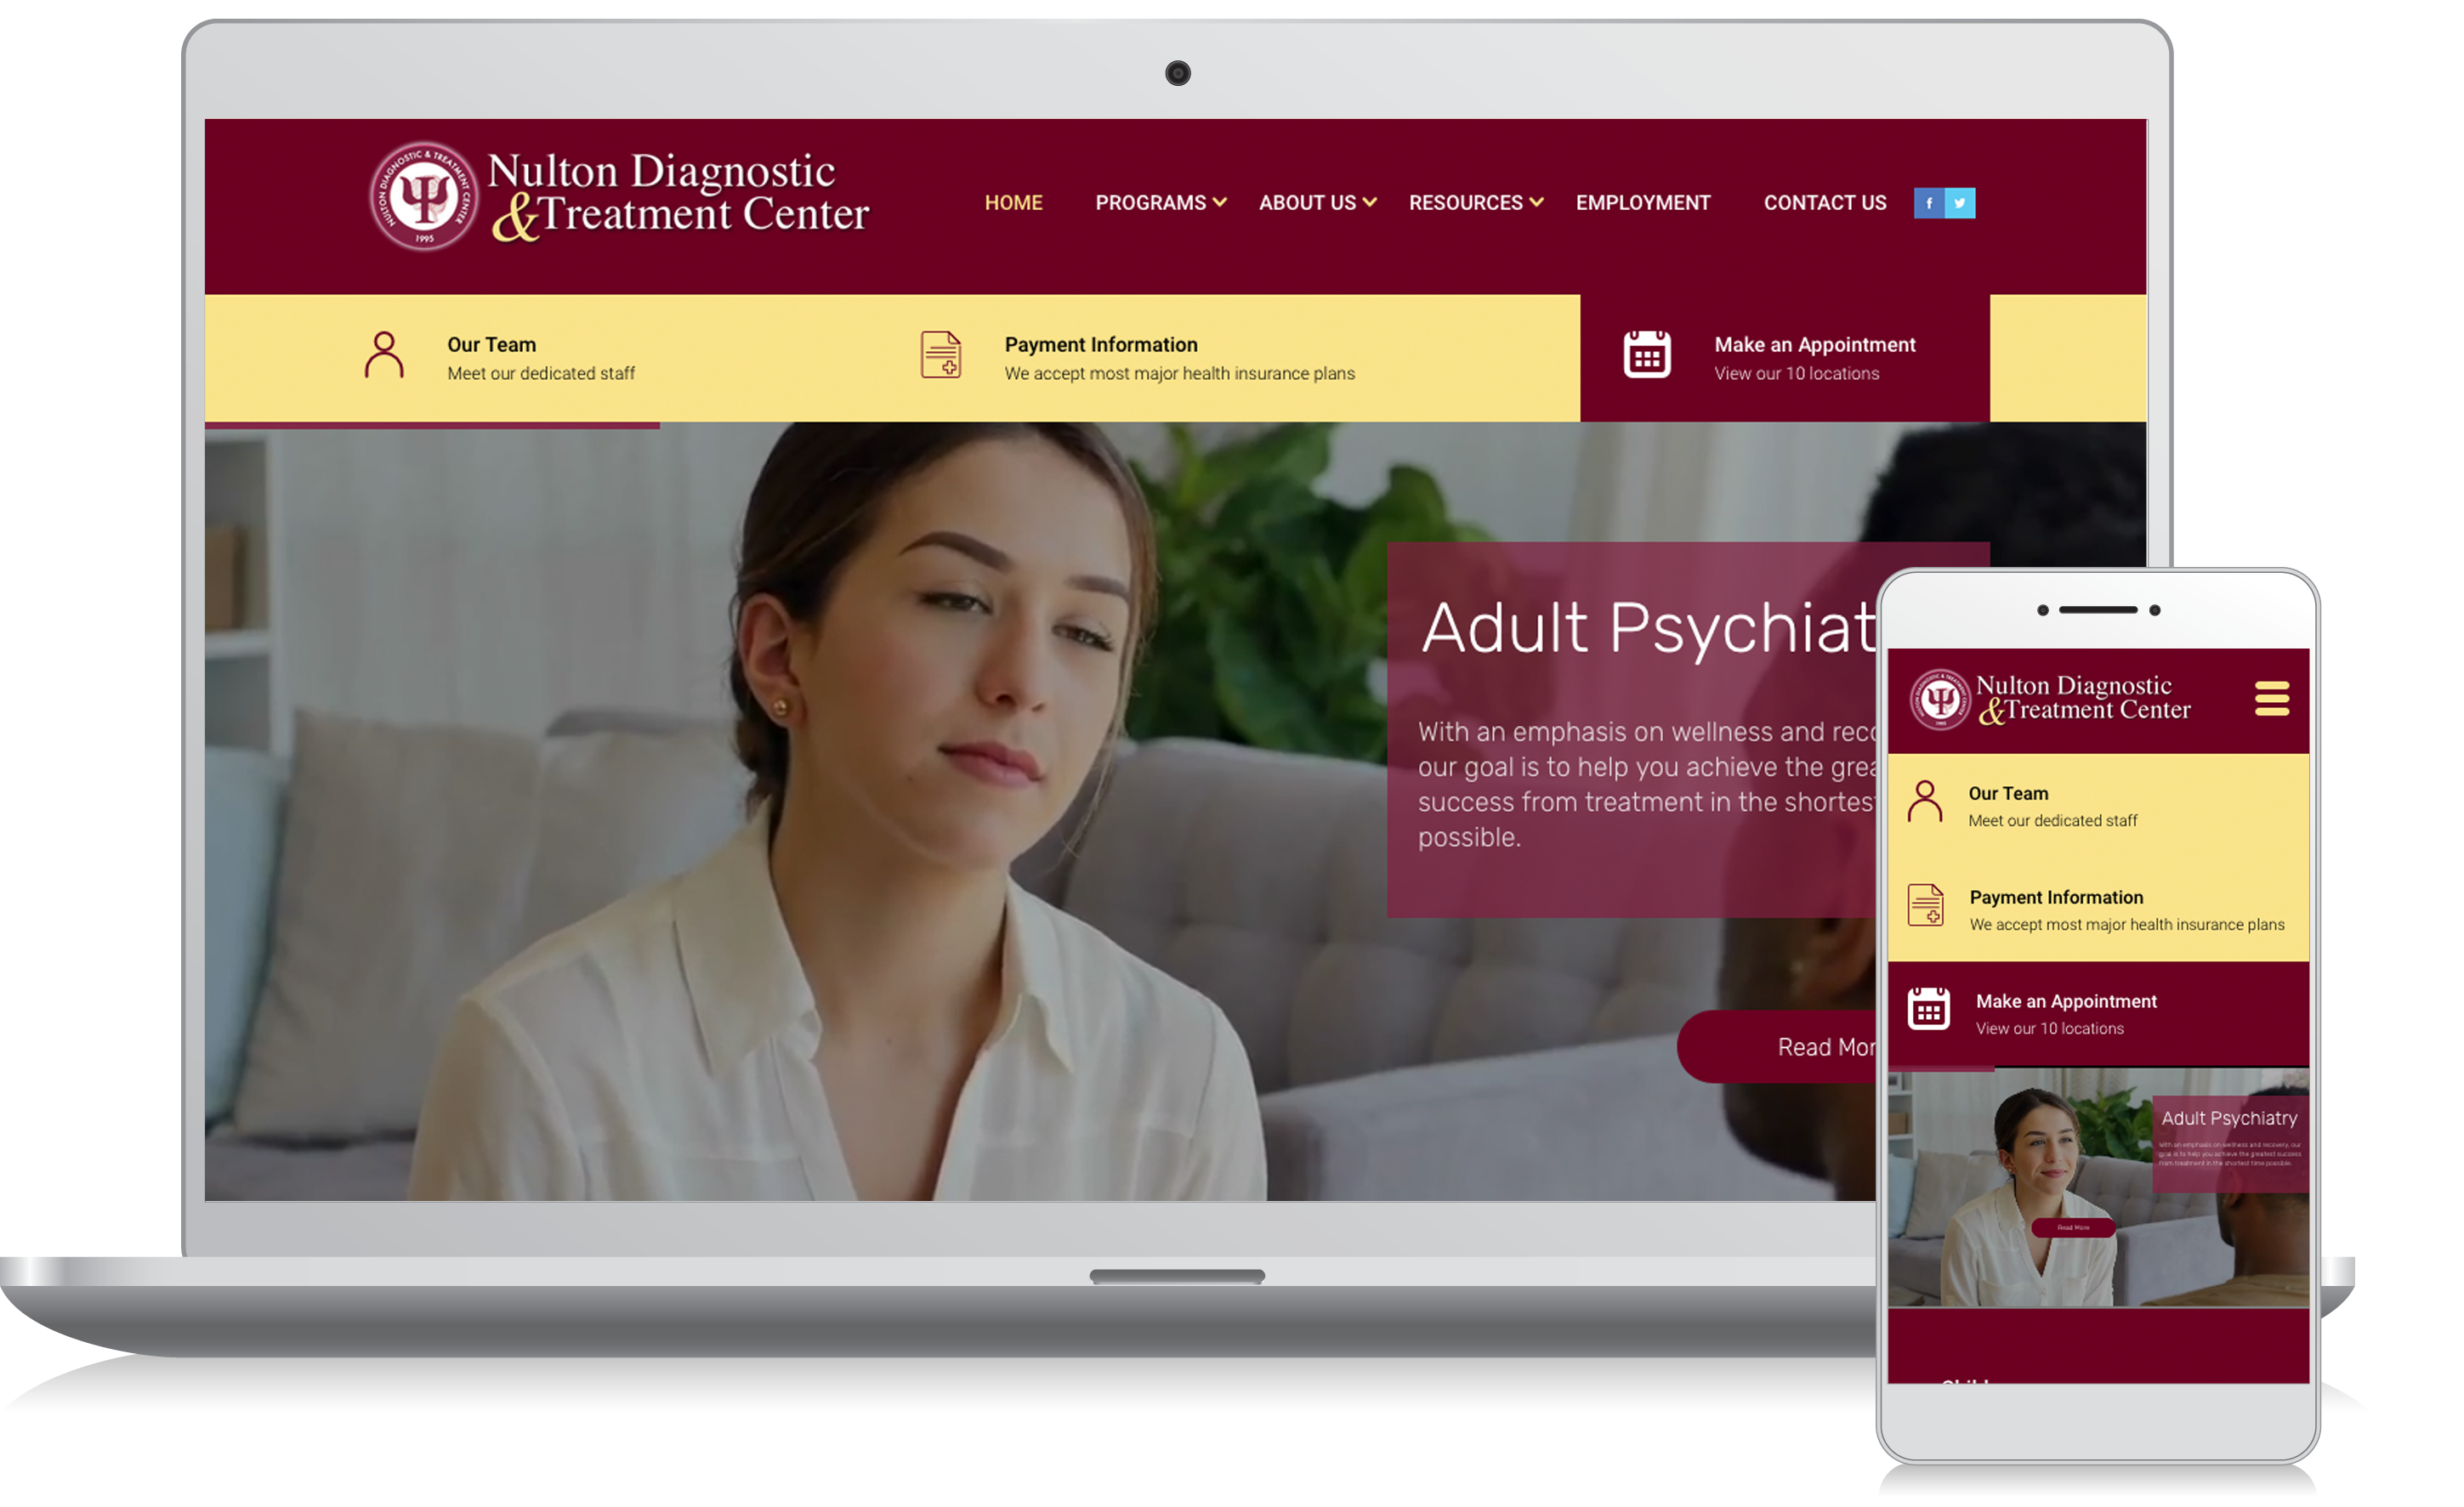 Cellphone and computer image of the Nulton Diagnostic Treatment Center website homepage